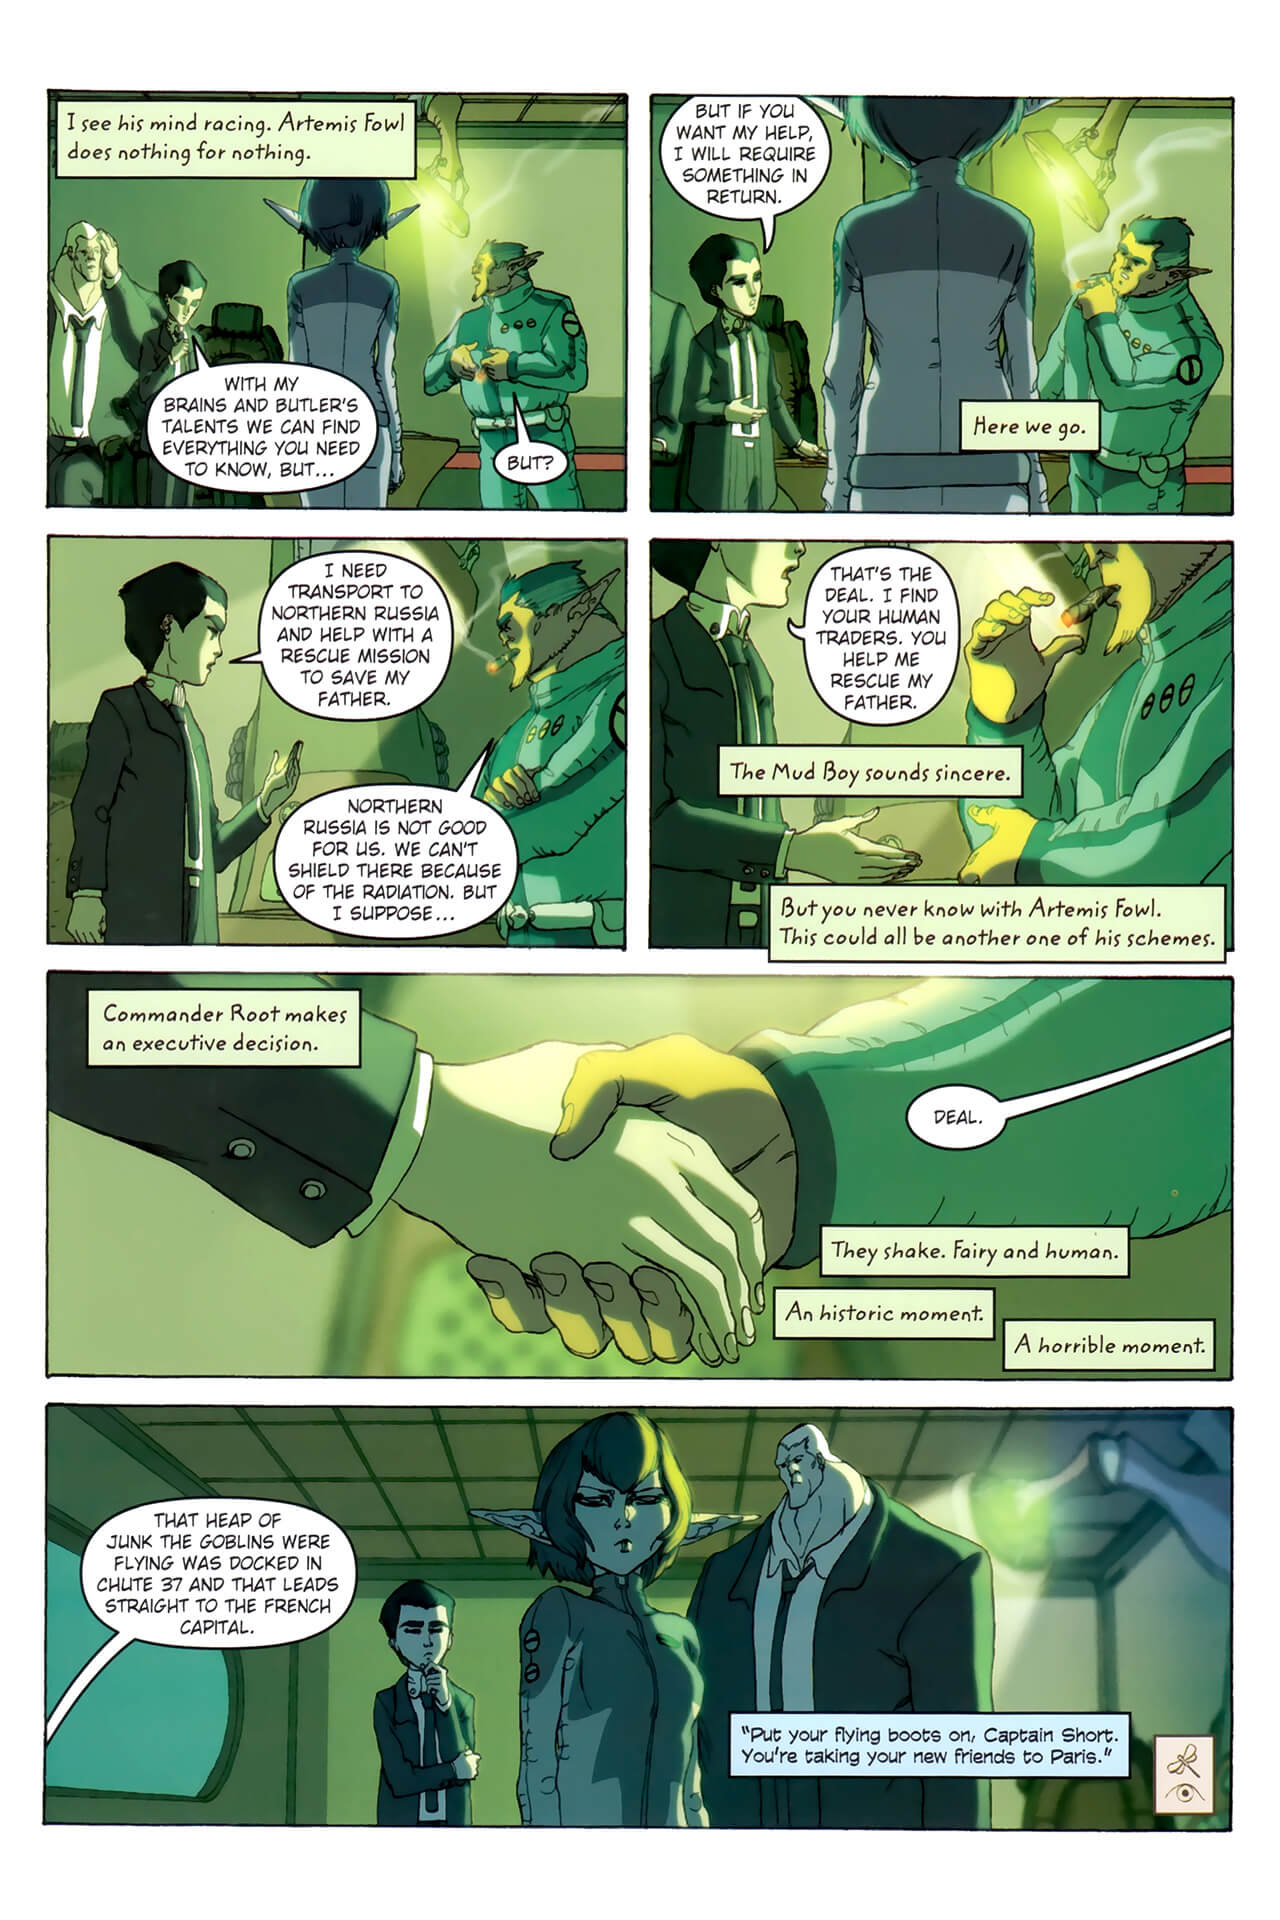 page 36 of artemis fowl the arctic incident graphic novel